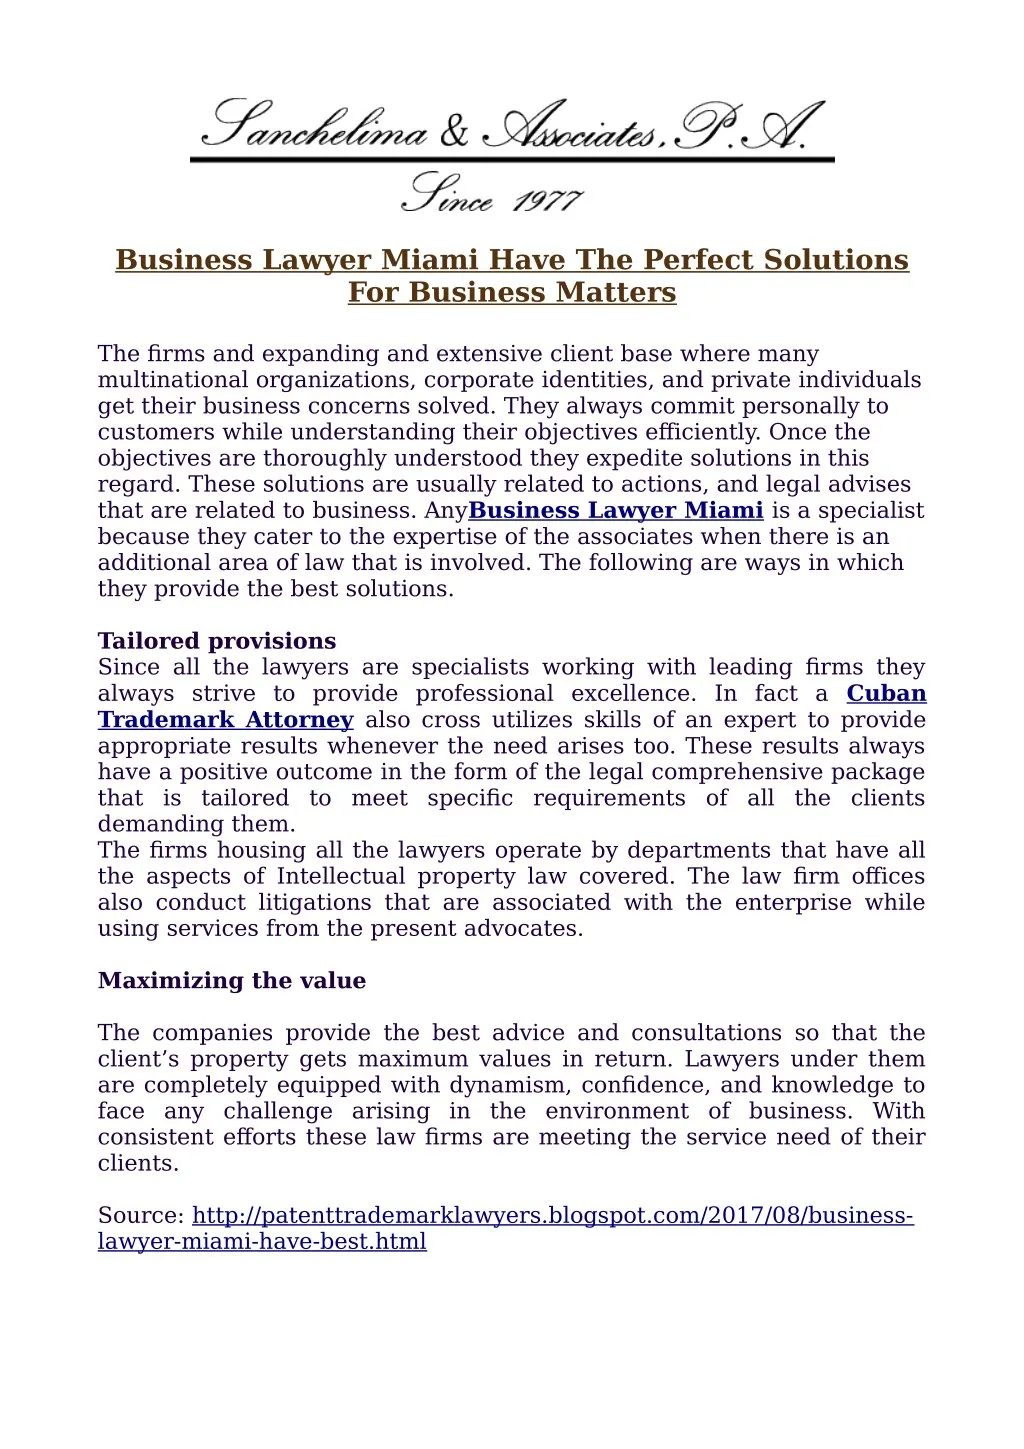 business lawyer miami have the perfect solutions